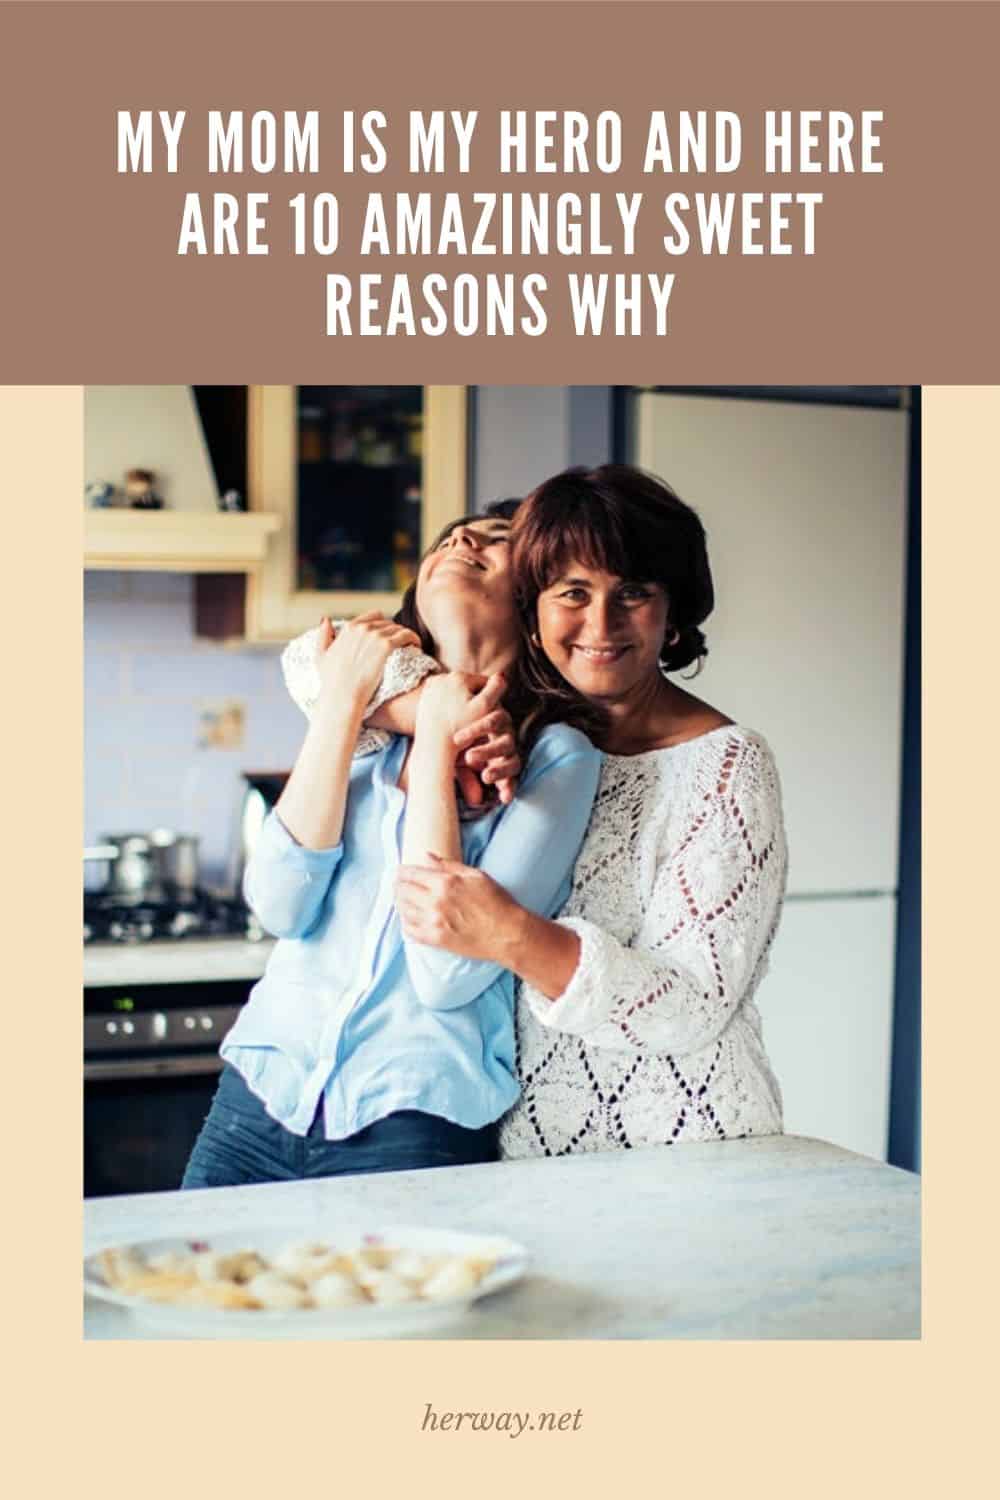 My Mom Is My Hero And Here Are 10 Amazingly Sweet Reasons Why